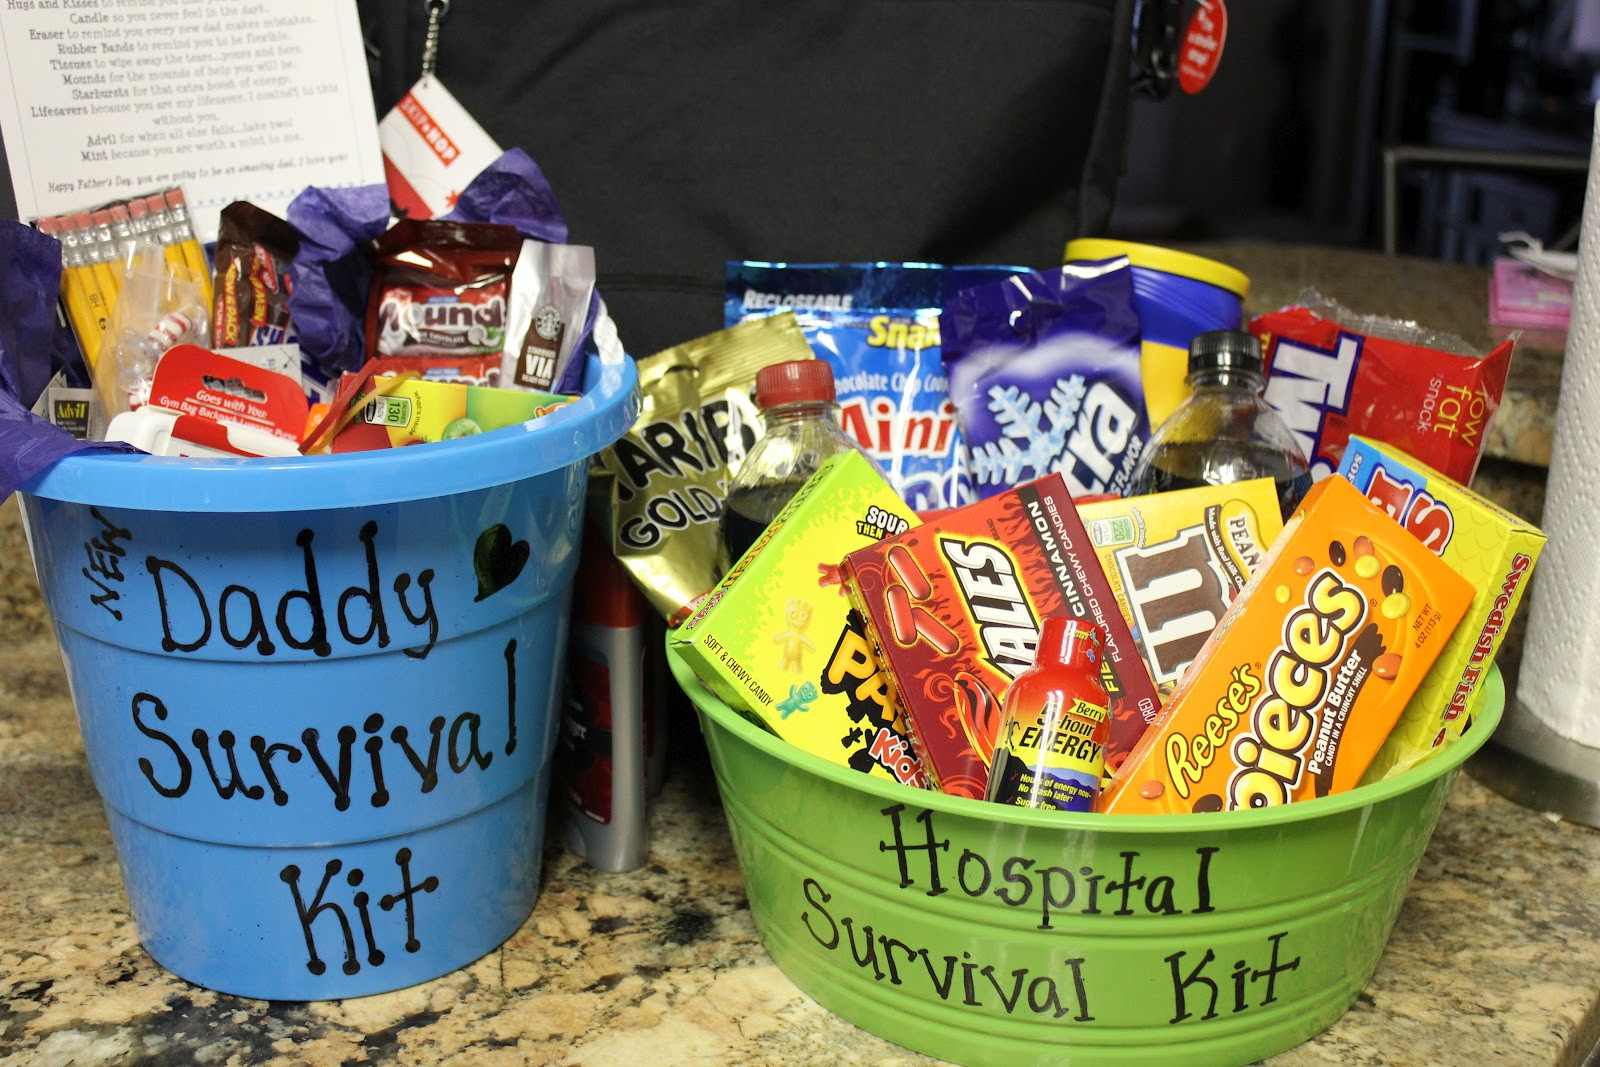 New Daddy Gift Basket Ideas
 simply made with love Daddy Survival Kit & Hospital